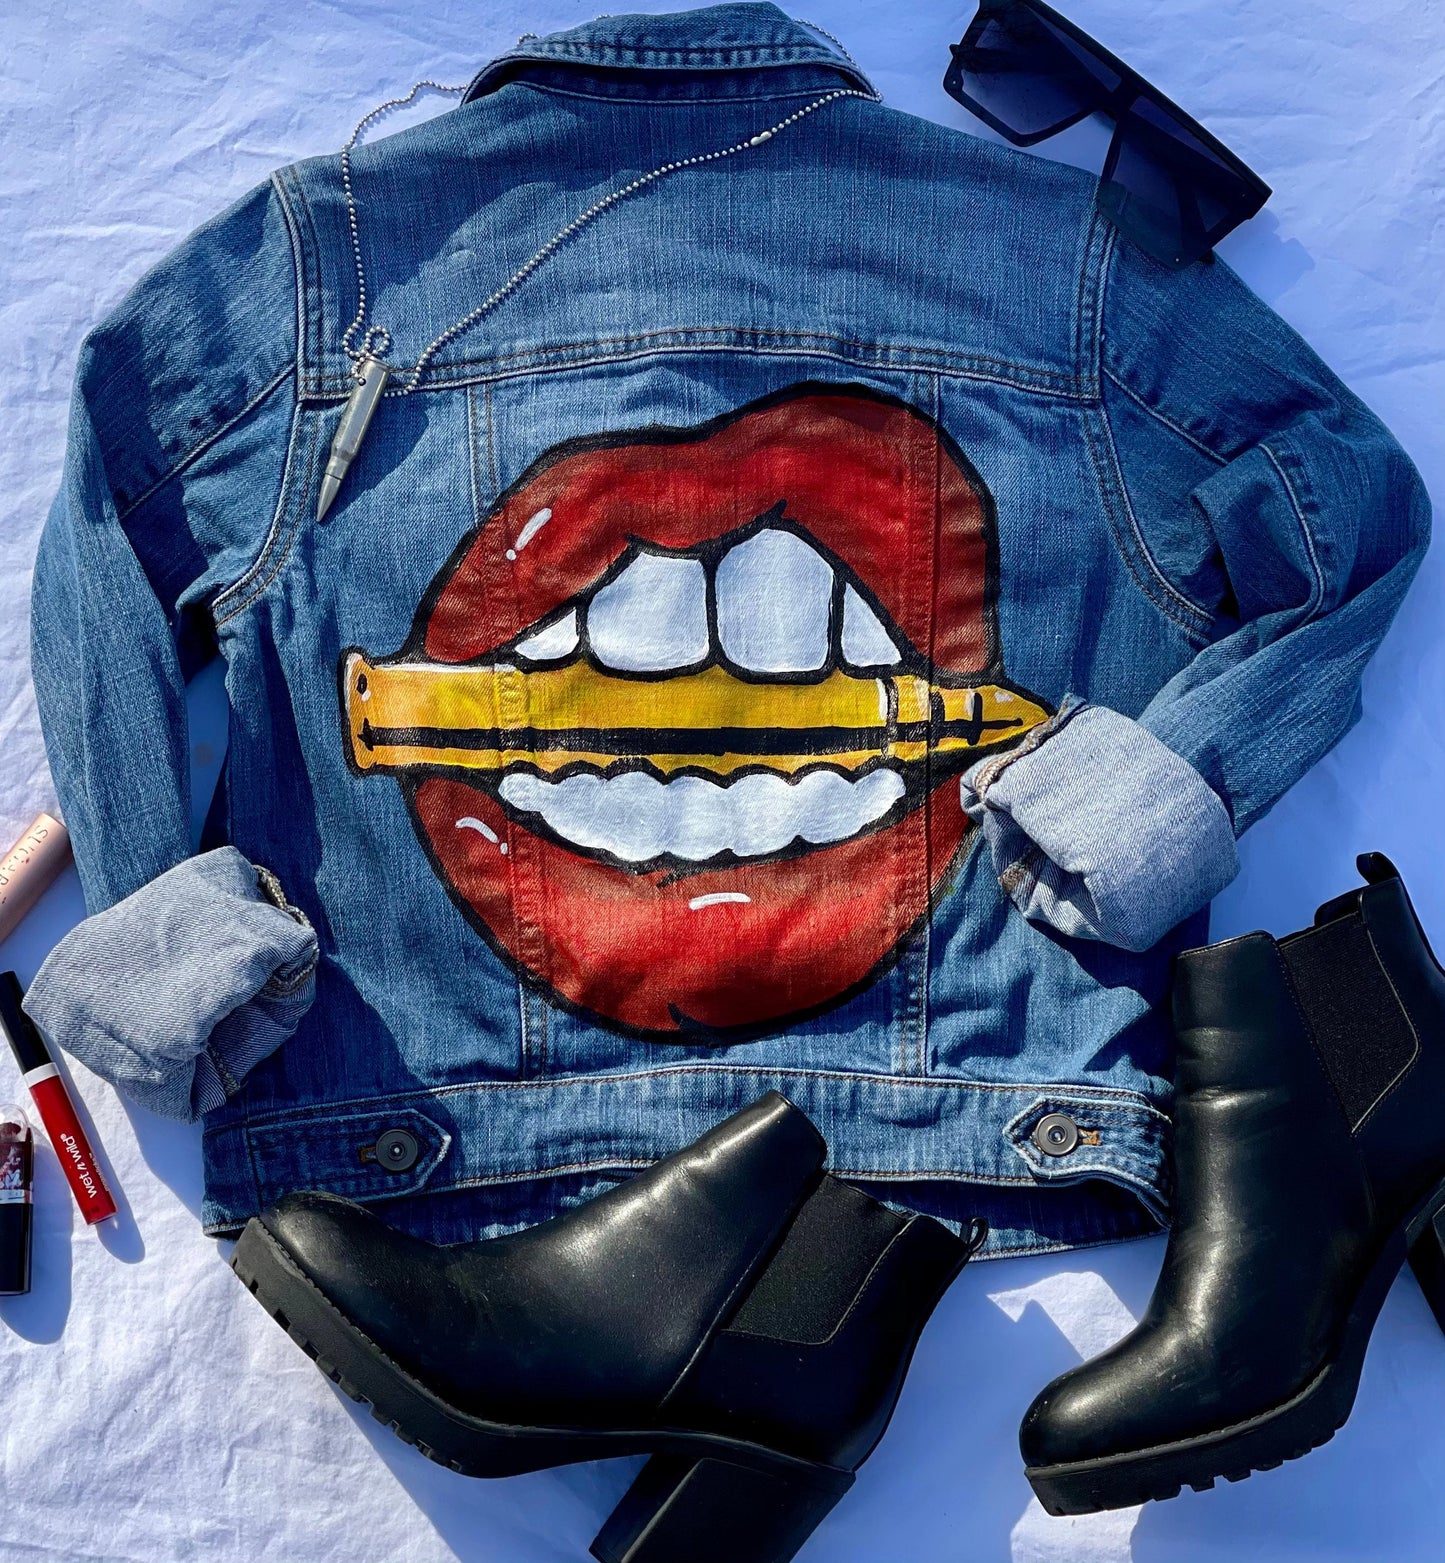 Bite the Bullet Womens SMALL Hand Painted Jean Jacket